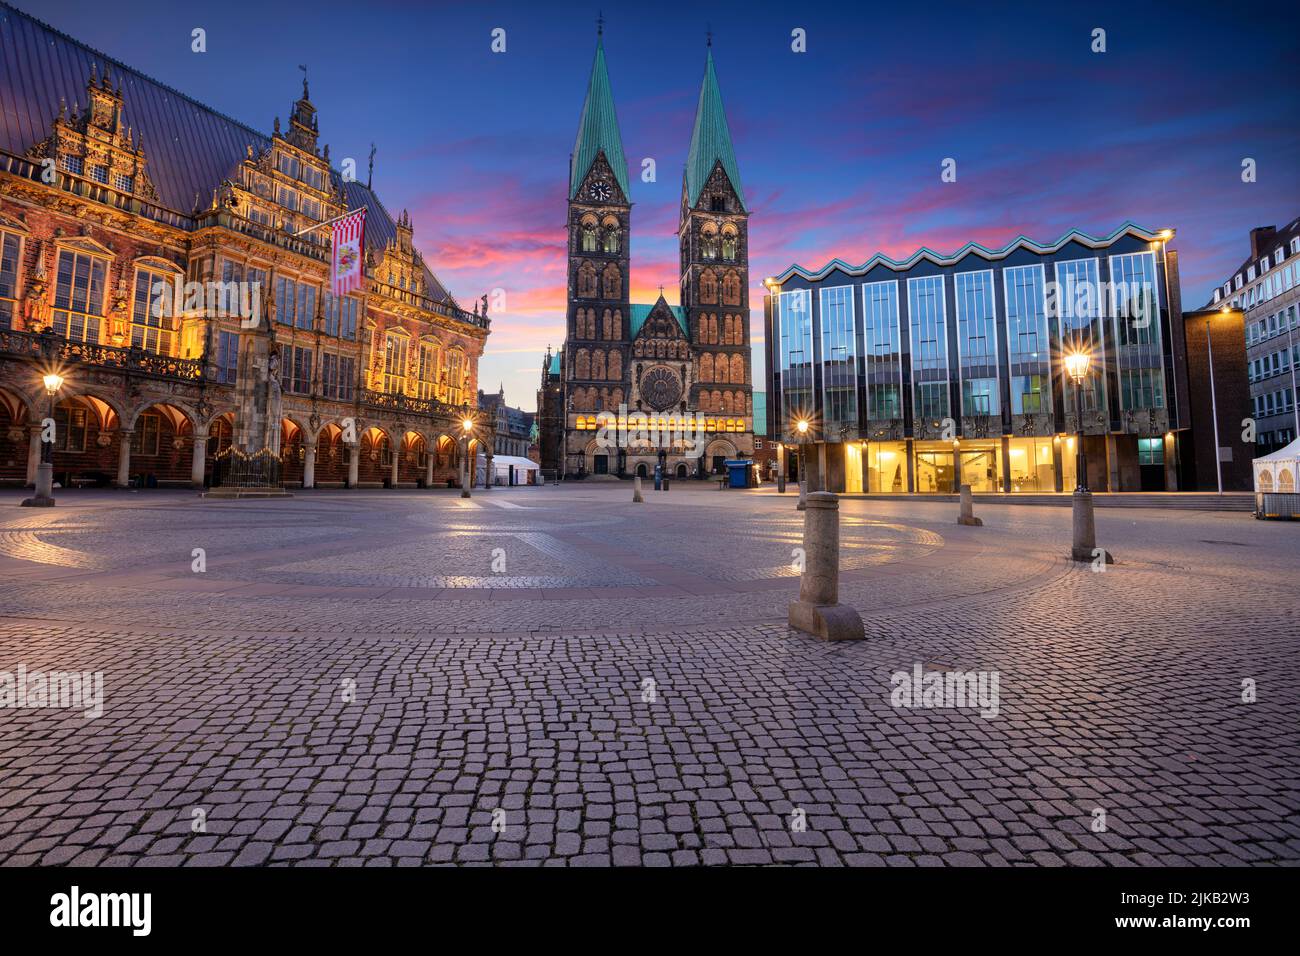 Bremen, Germany. Cityscape image of Hanseatic City of Bremen, Germany with historic Market Square, Bremen Cathedral and Town Hall at summer sunrise. Stock Photo